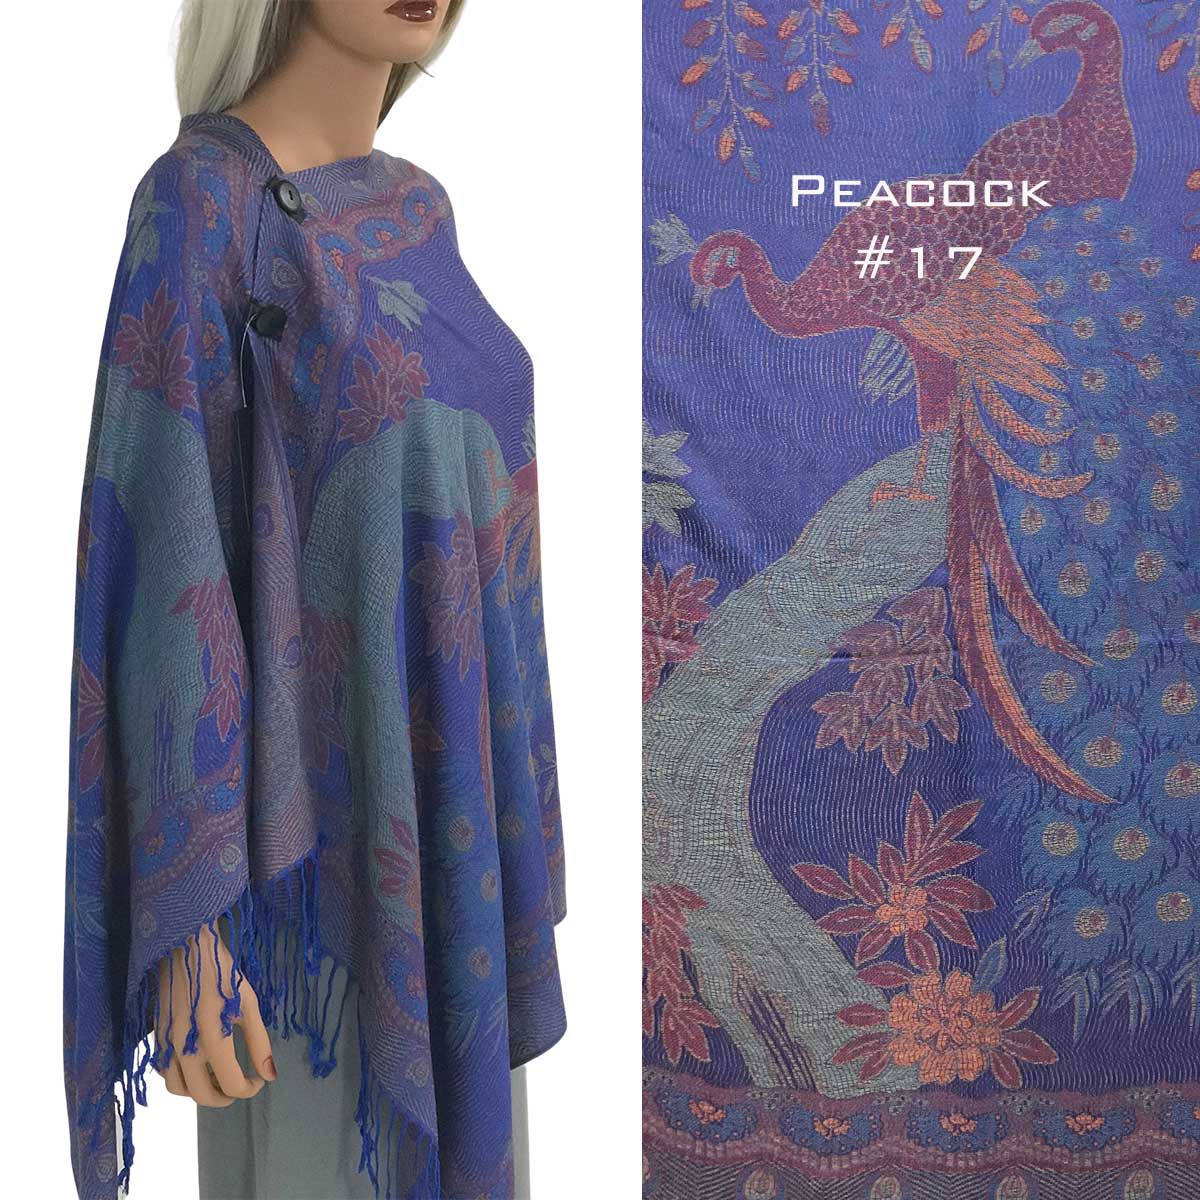 3109 - Pashmina Style Button Shawls Peacock - #17 <br>Pashmina Style Shawl with Wooden Buttons - 